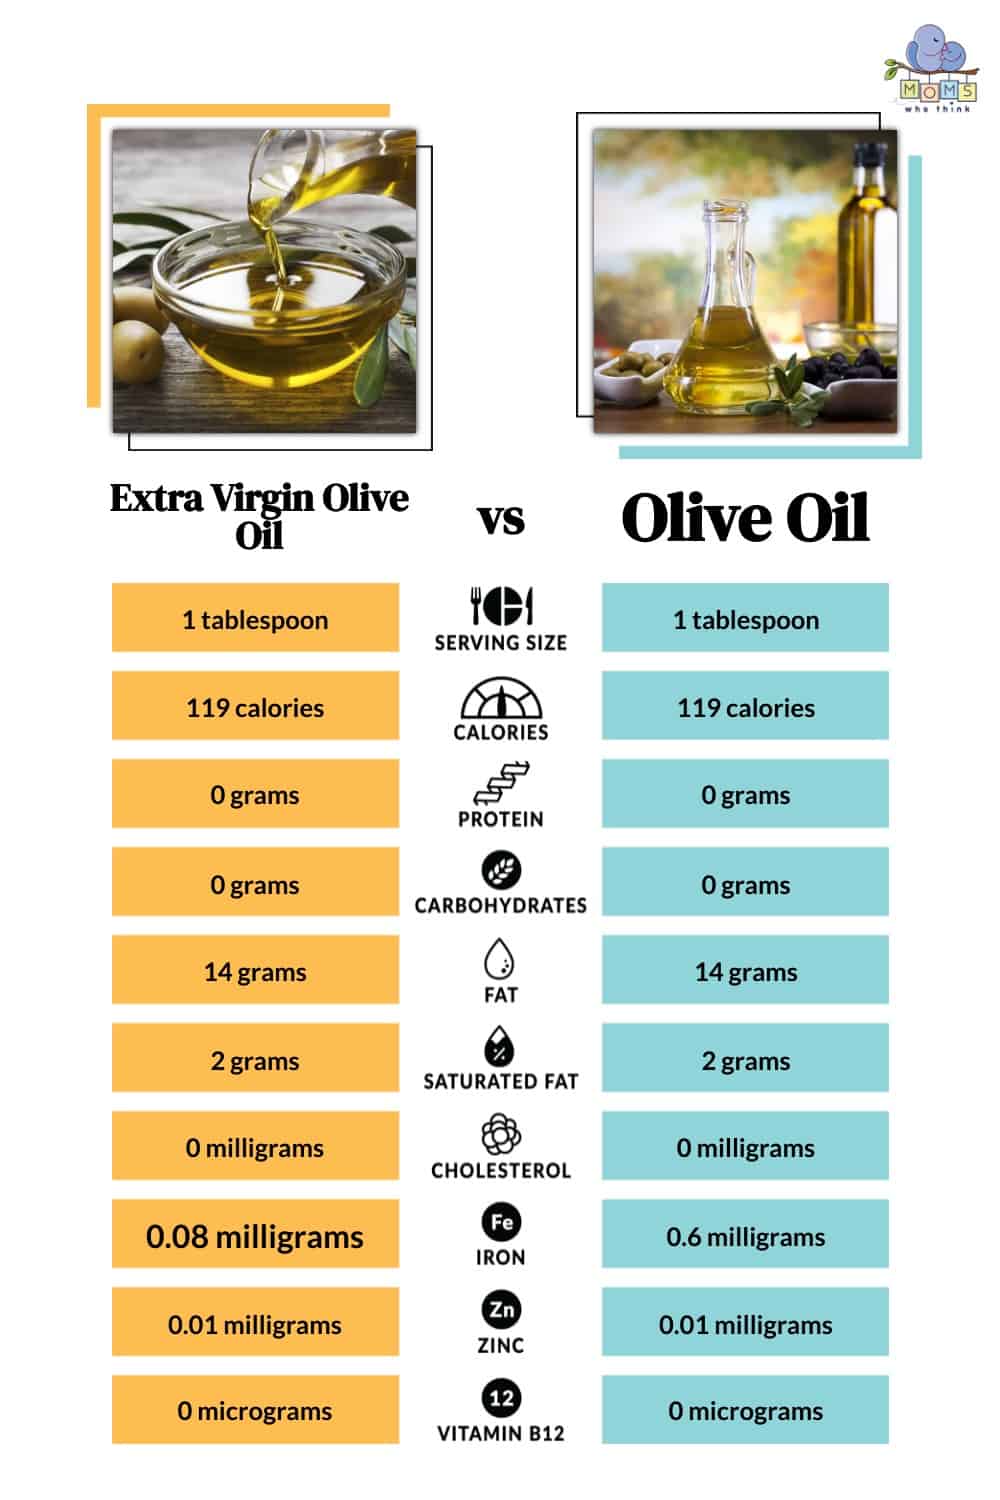 Extra Virgin Olive Oil vs Olive Oil Nutritional Facts